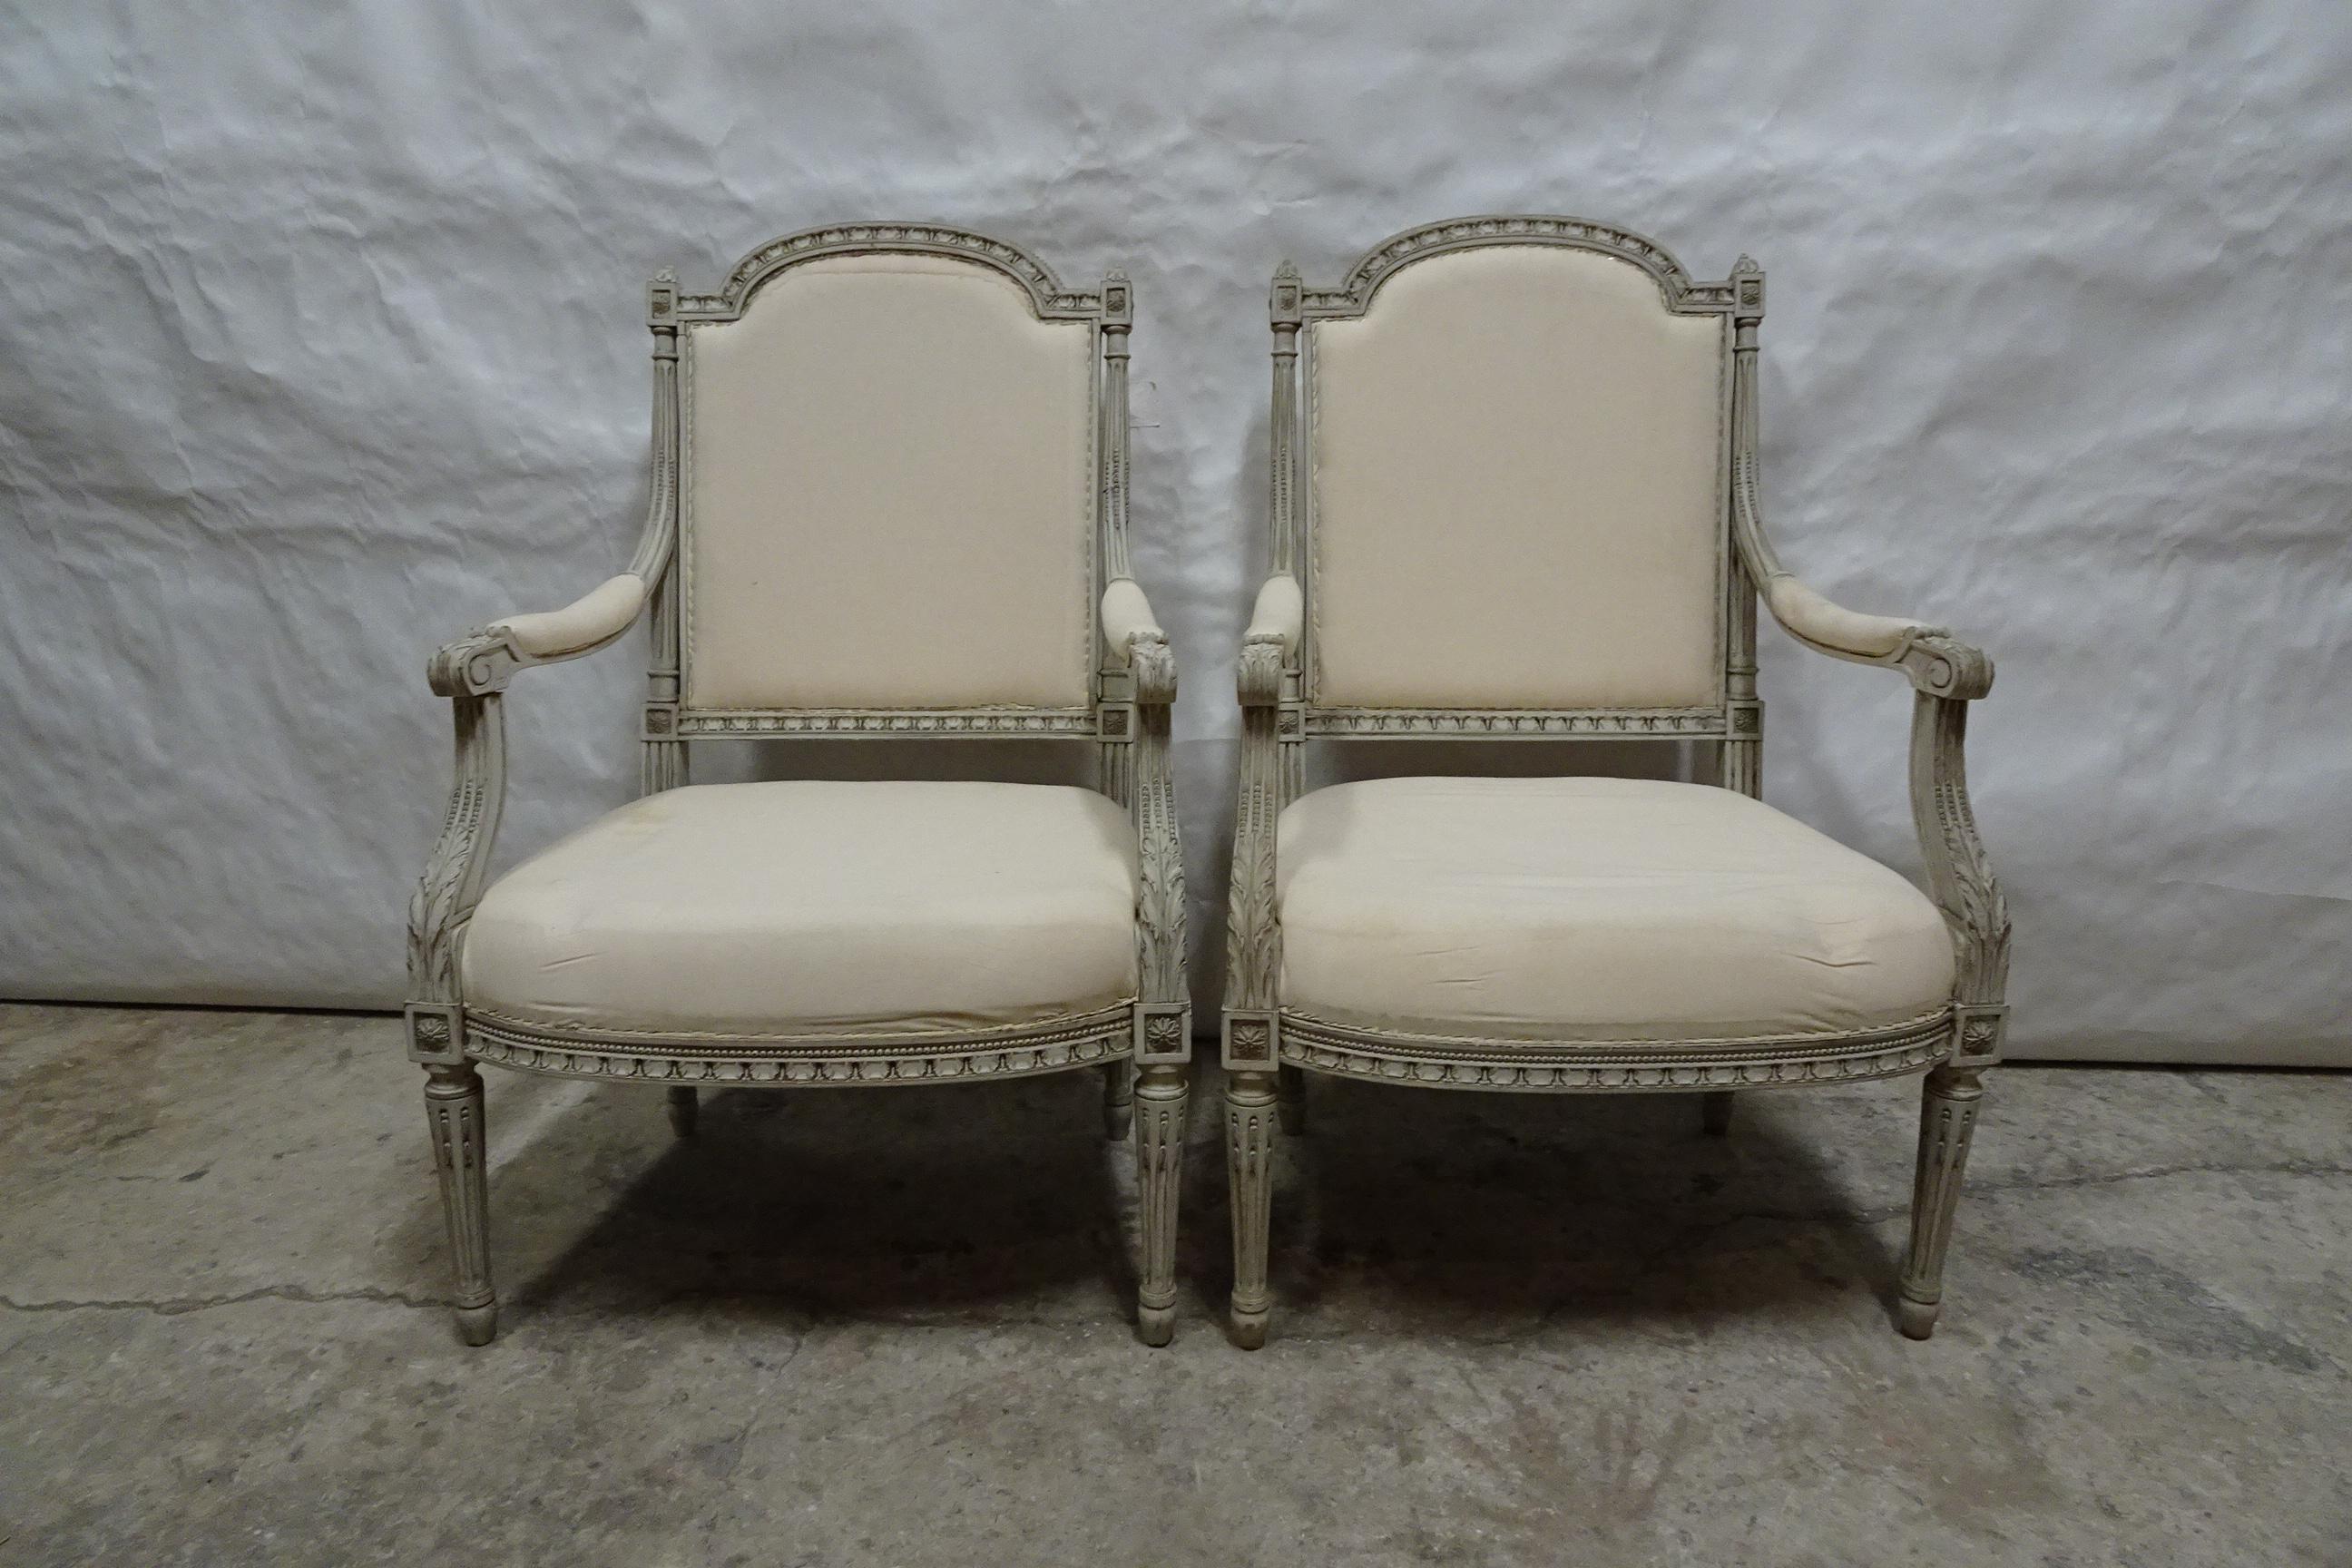 This is a Unique Swedish Gustavian Style Armchairs.